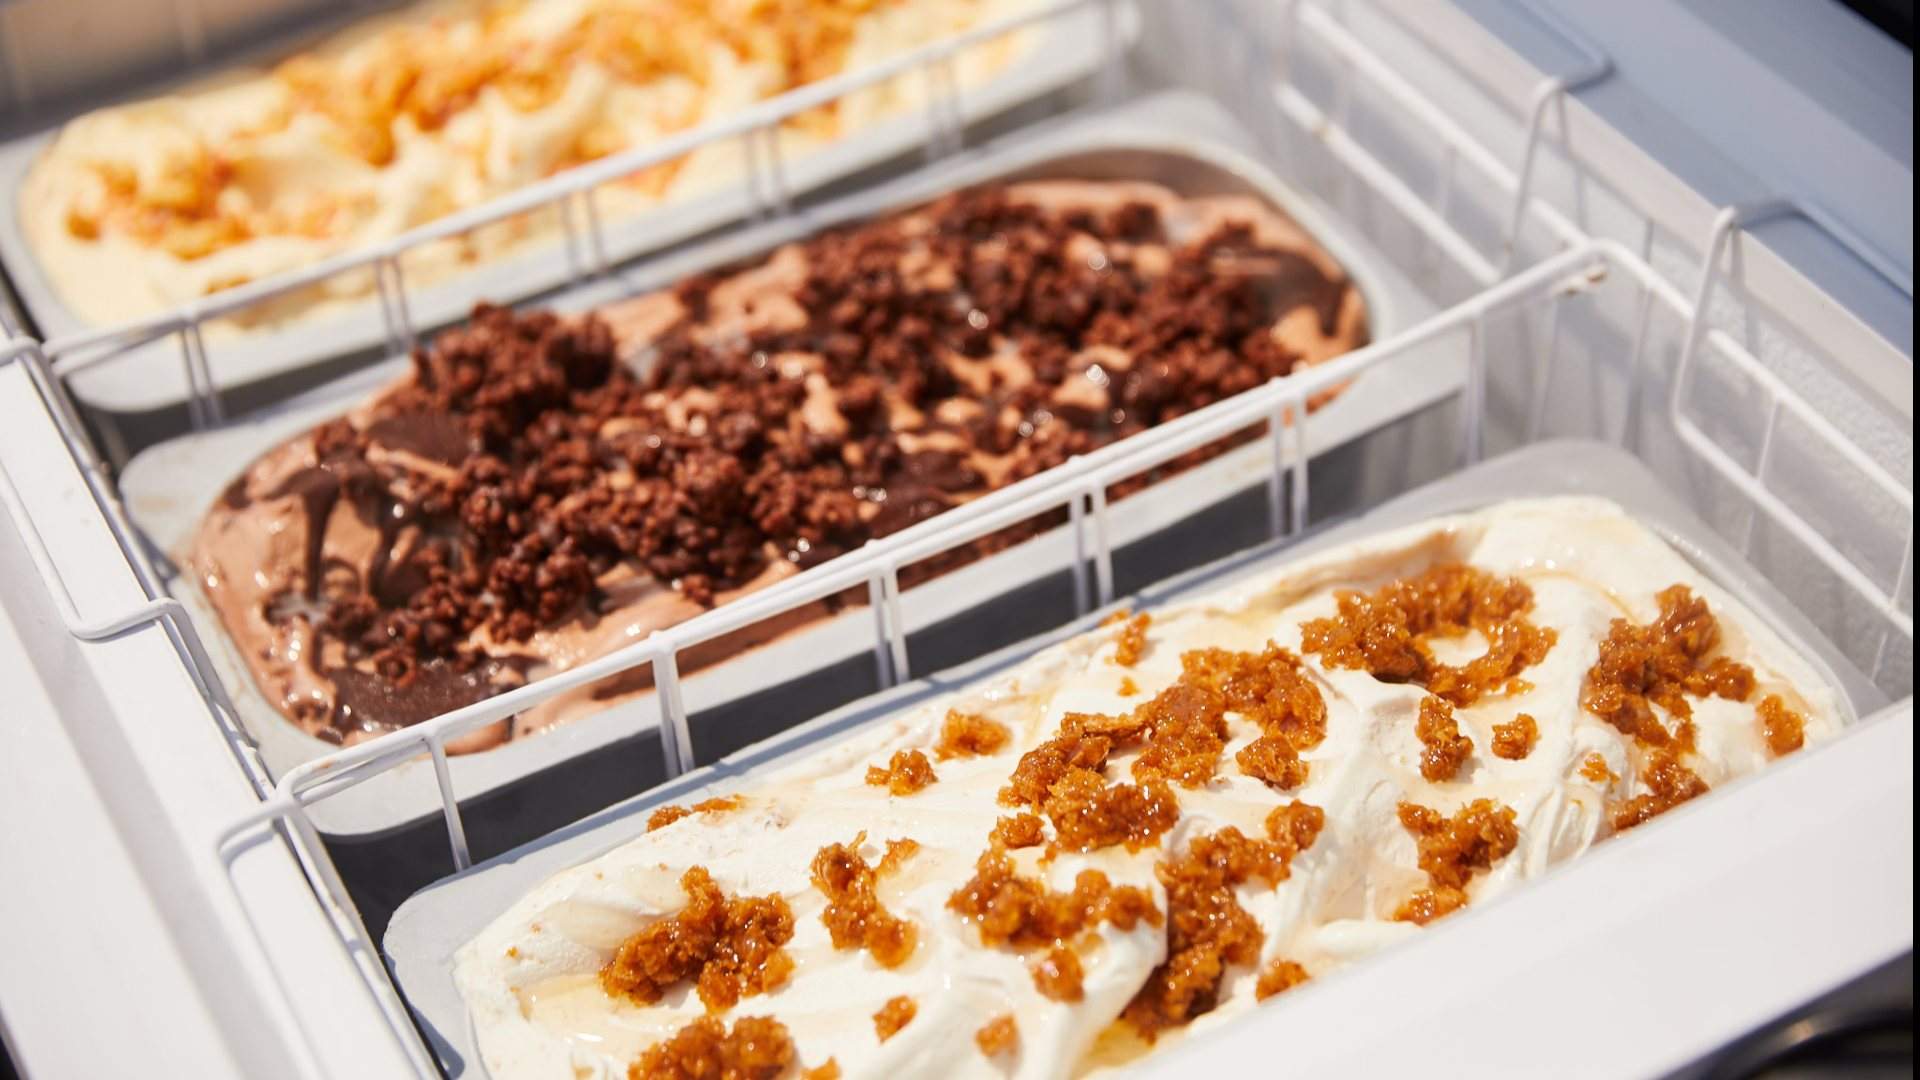 Gelatissimo Has Released a Trio of Nostalgic Aussie Flavours for Summer